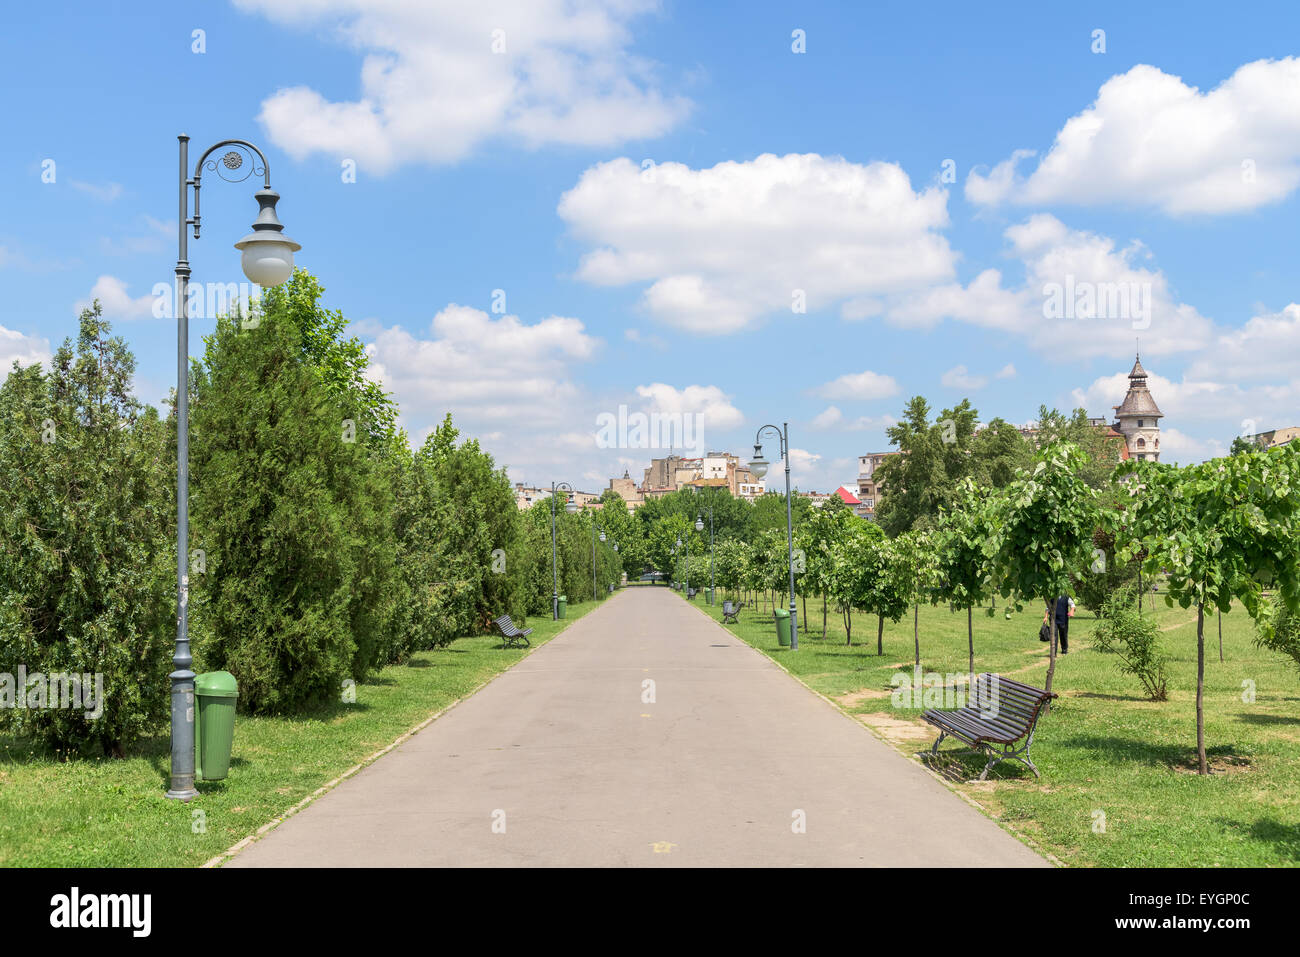 The Public Park Izvor In Bucharest Was Built In 1985 And Is Located Right Next To The Parliament Palace (Casa Poporului). Stock Photo